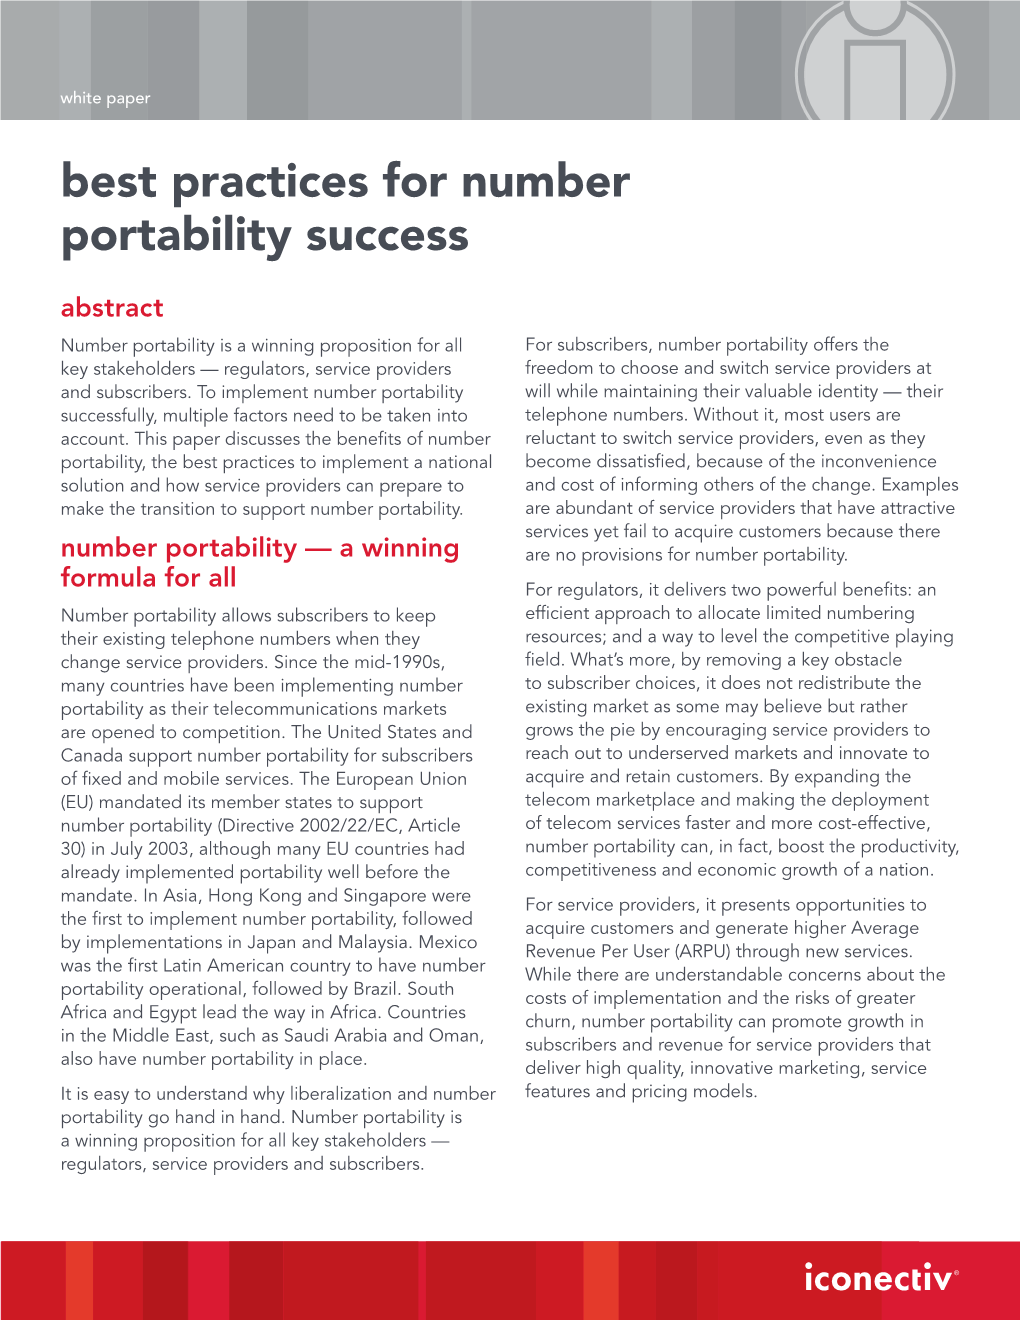 Best Practices for Number Portability Success